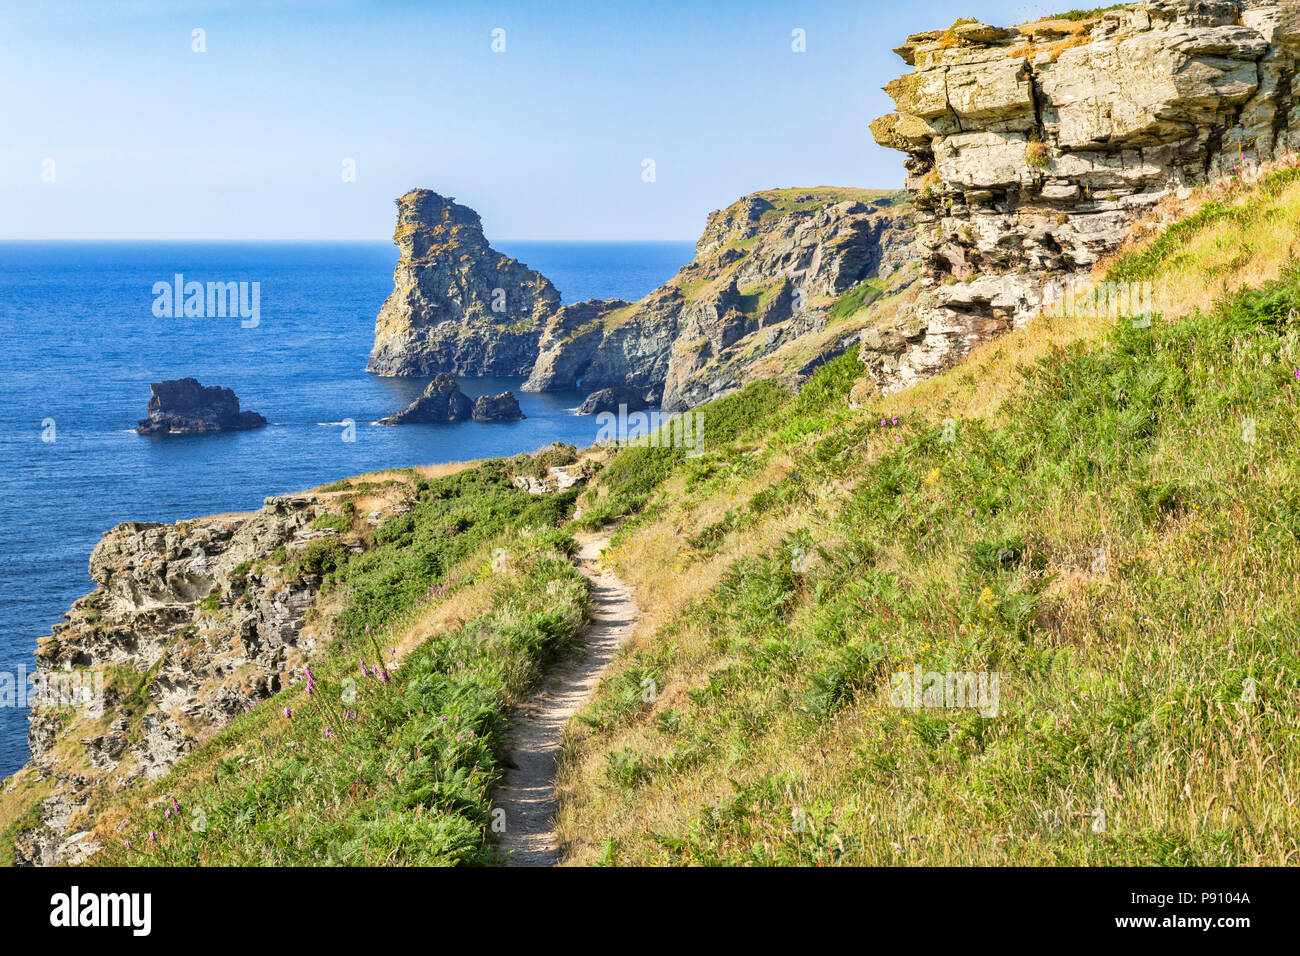 The South West Coast Path in a beautiful stretch of the Cornish coast, between Tintagel and Bossiney, with cliffs and offshore rocks, on a beautiful s Stock Photo